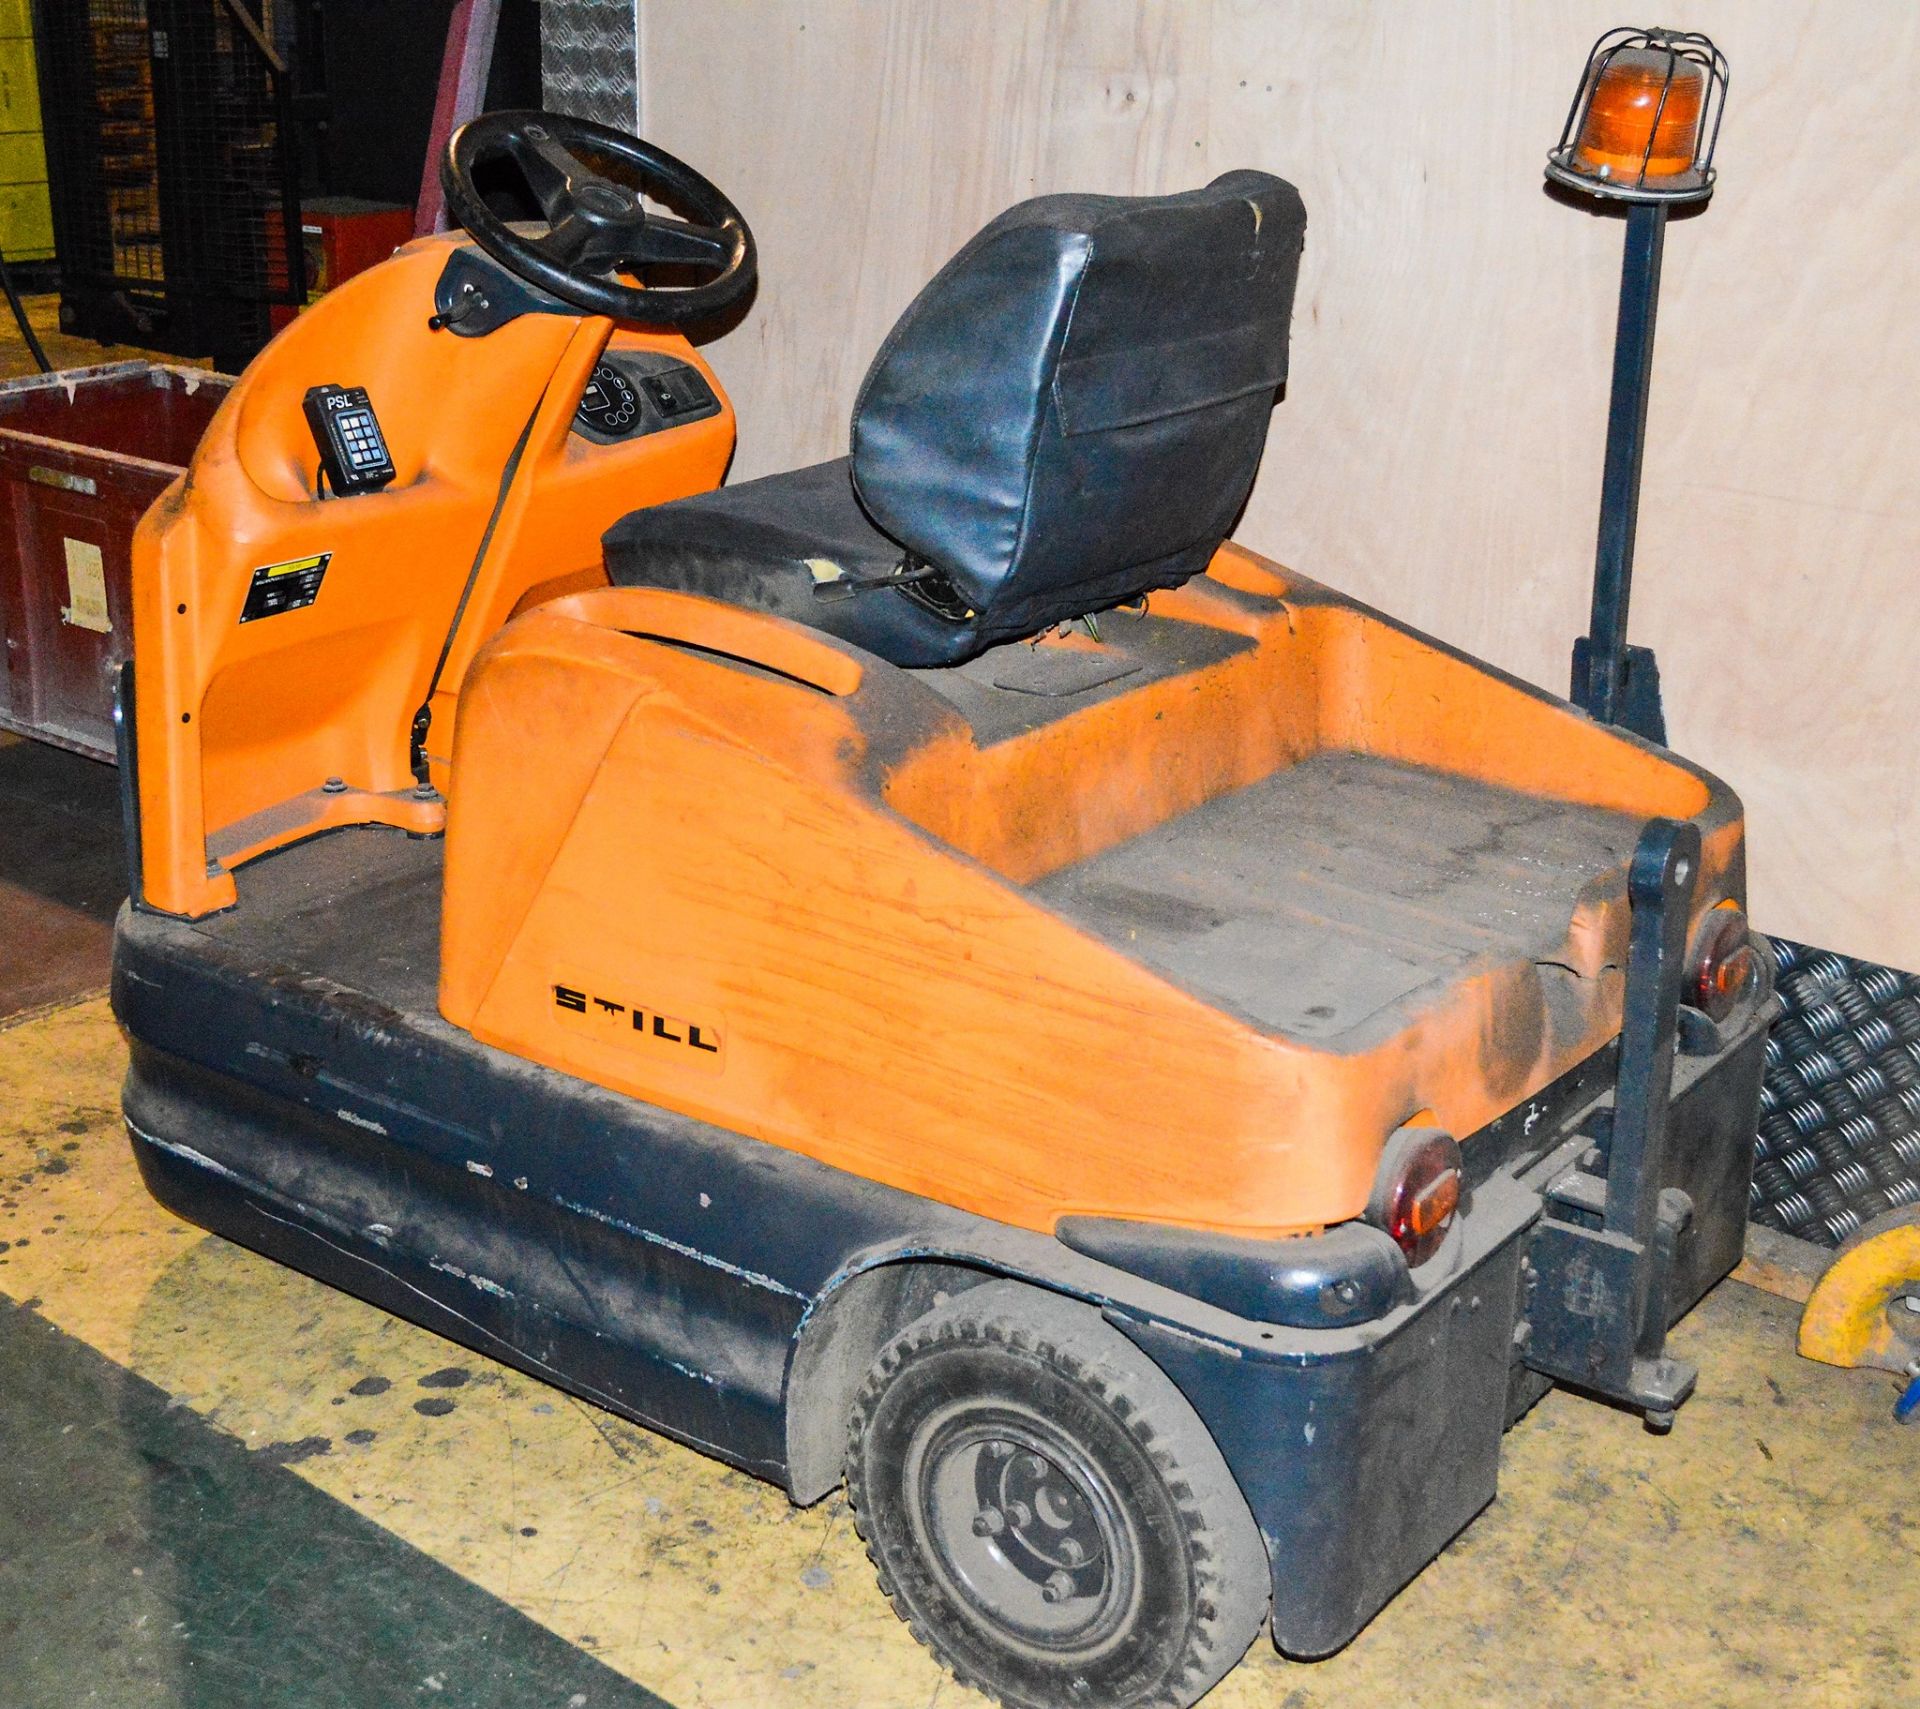 Stihl battery electric factory tug c/w charger - Image 2 of 2